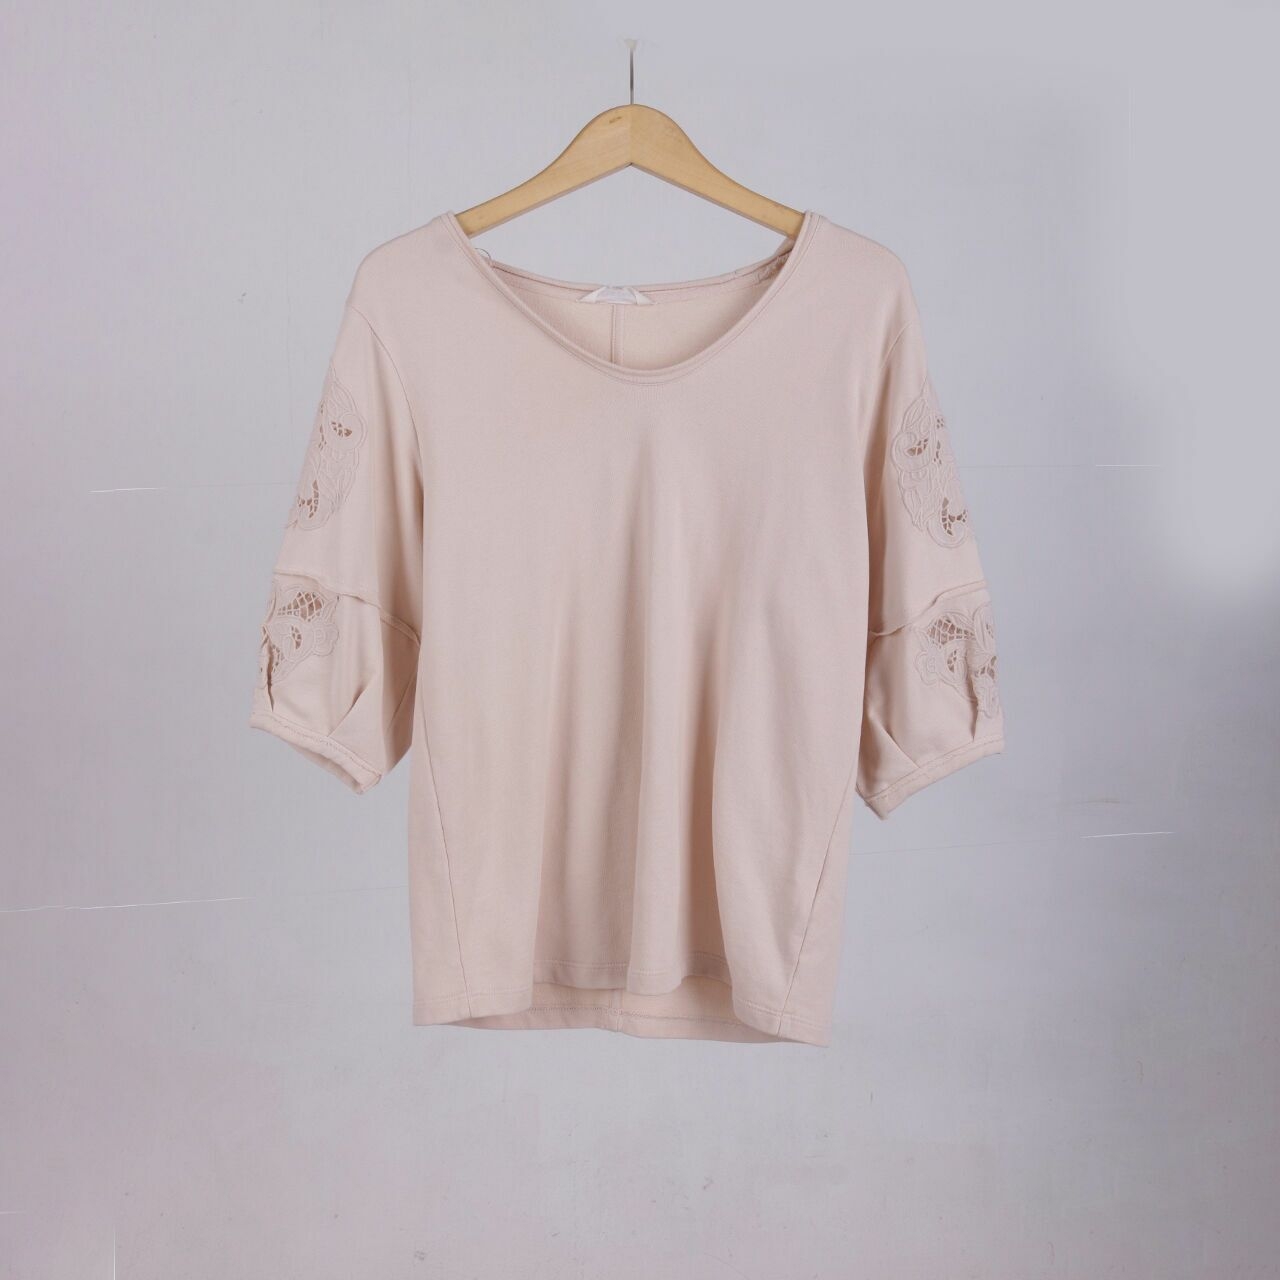 Marks & Spencer by Per Una Soft Pink Blouse